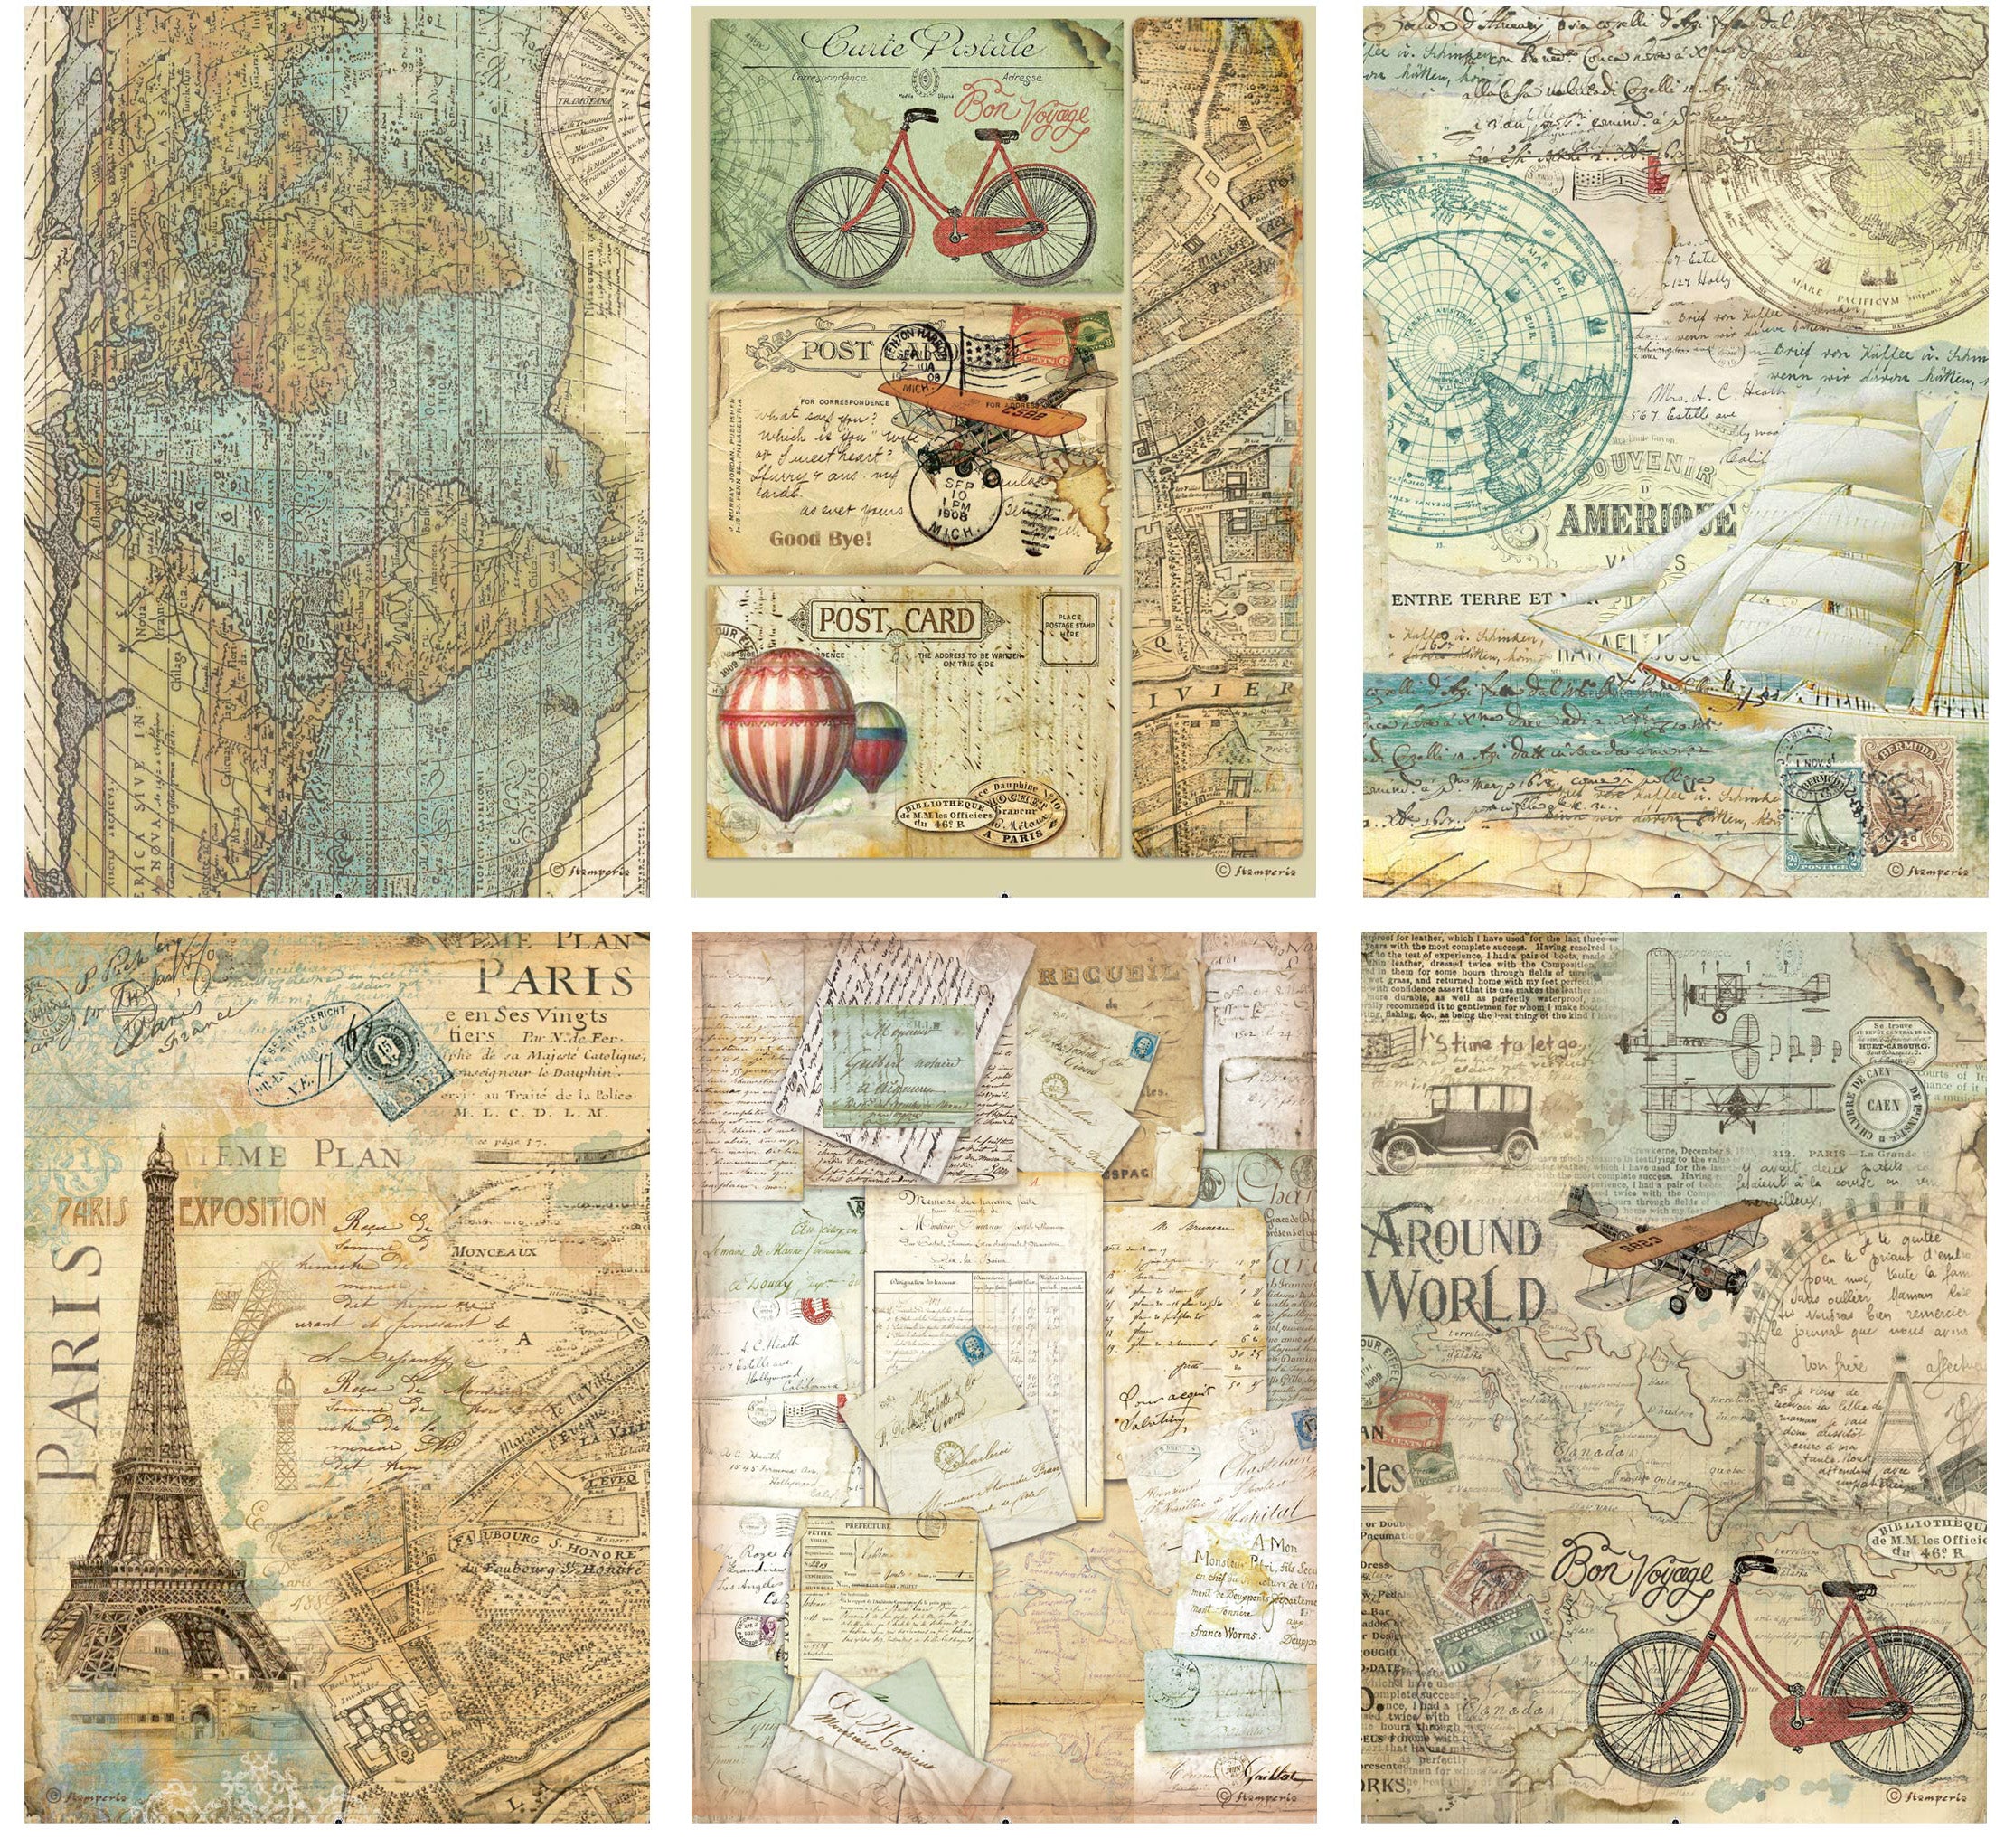 Travel Scrapbook Paper 12x12 - World Map Scrapbook Paper with Plane, Stamp,  Luggage Design | Vacation Scrapbook Paper for Scrapbooking, Photo Album